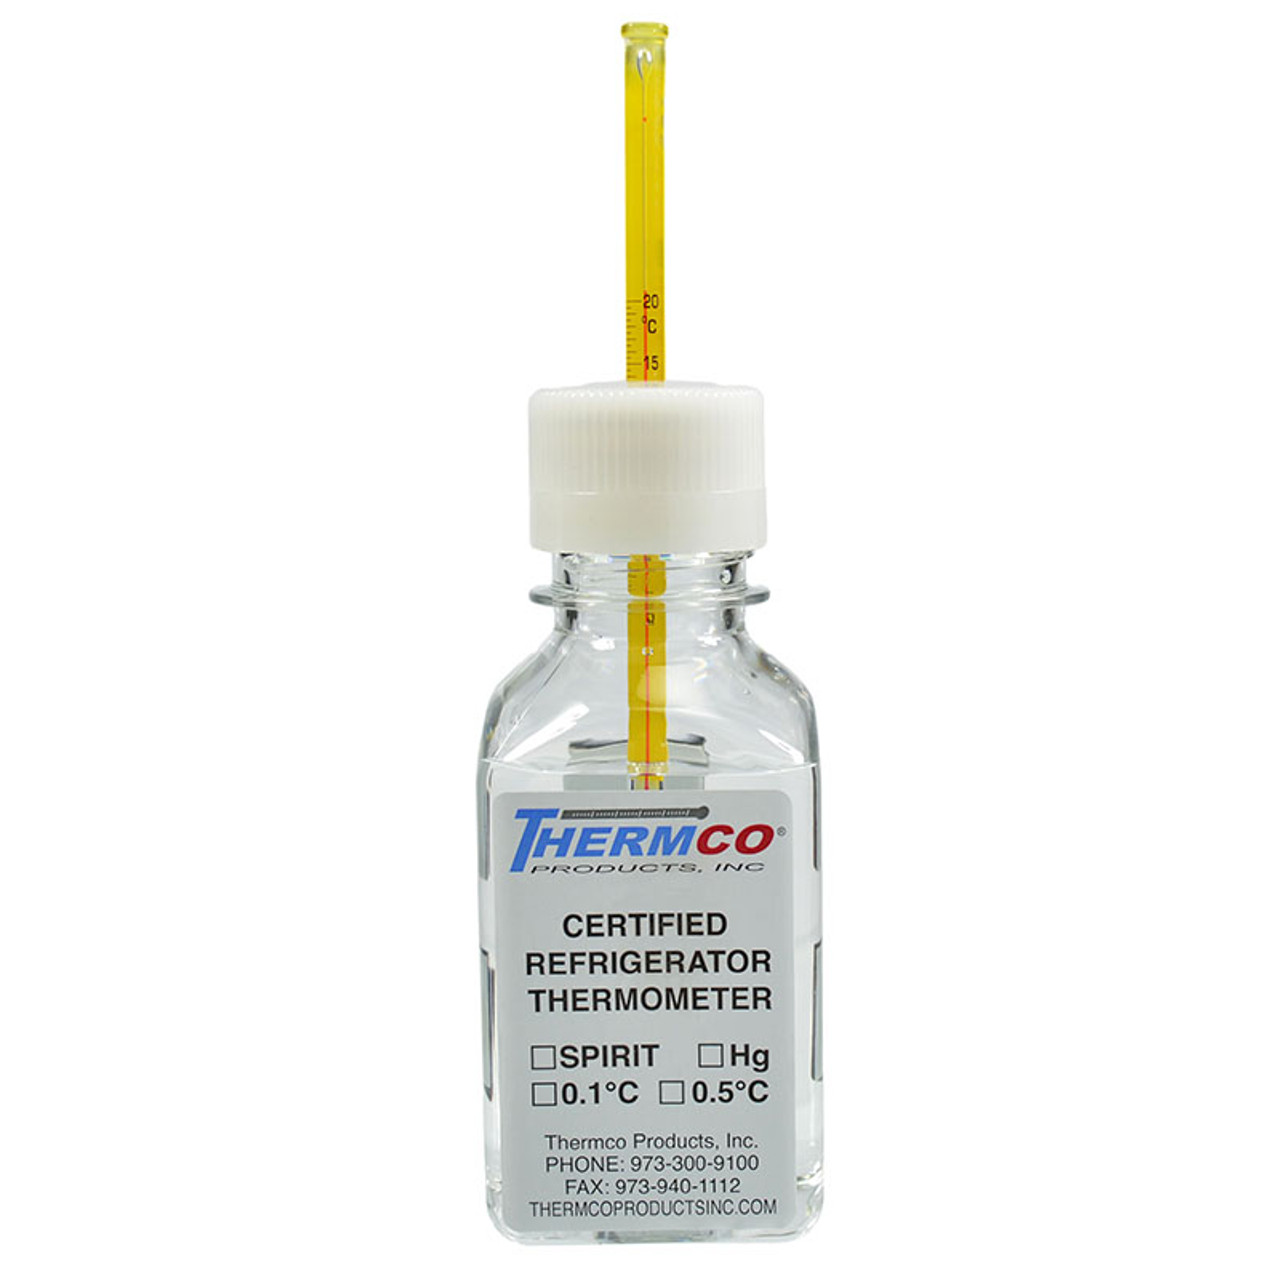 Accu-Safe Enclosed Chamber Bottle Thermometers, Thermco